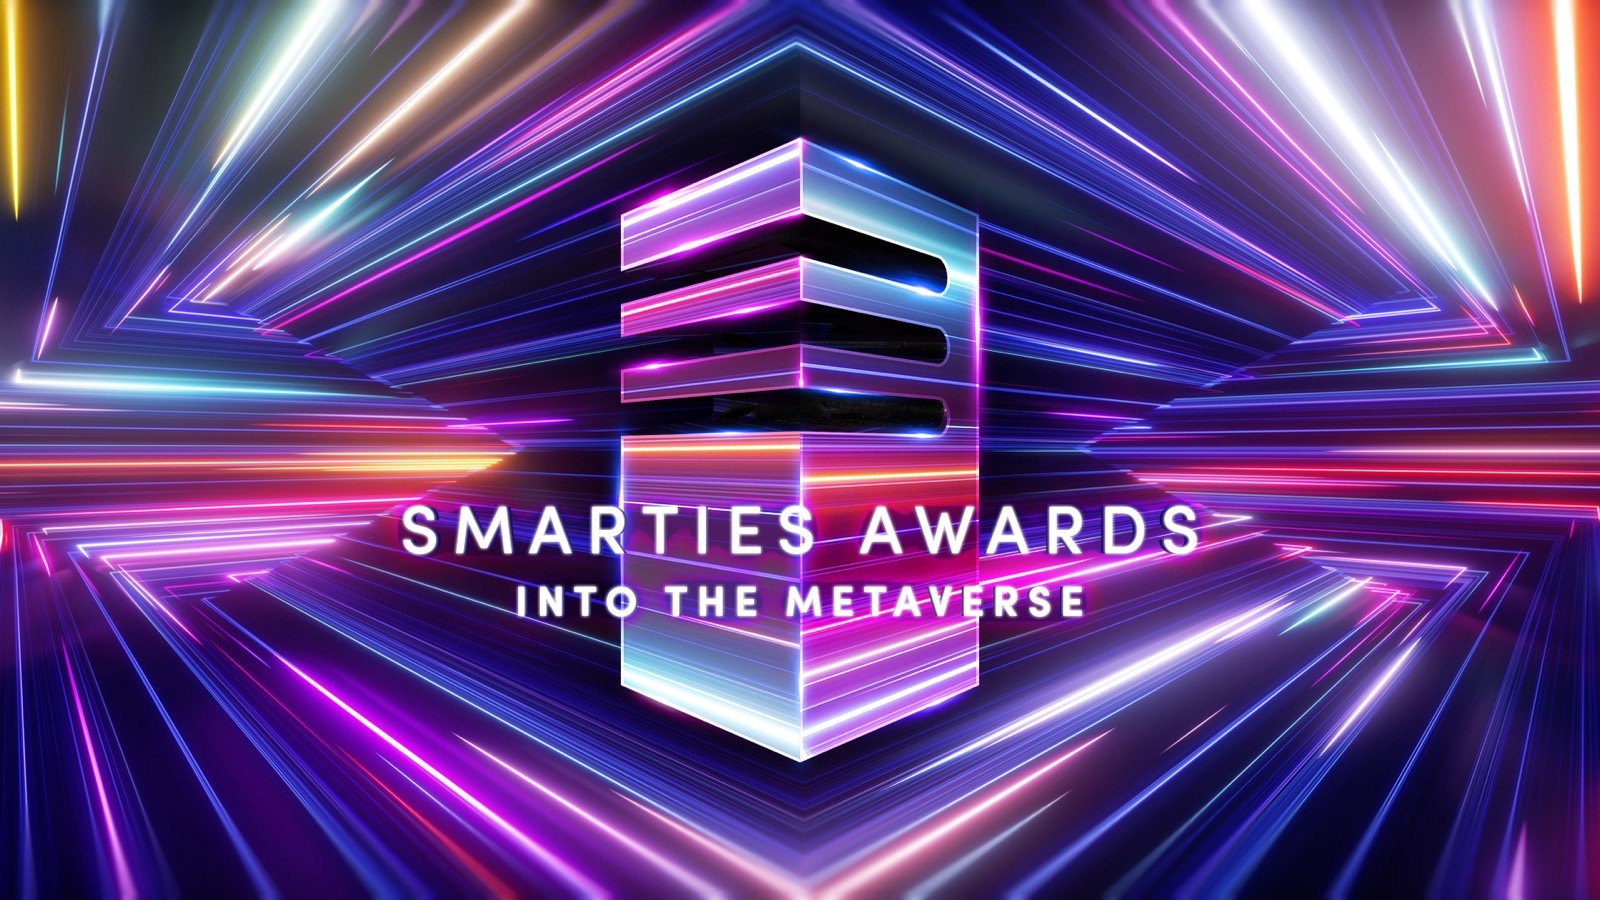 MMA MENA To Hand Out Smarties Awards as NFTs This Year